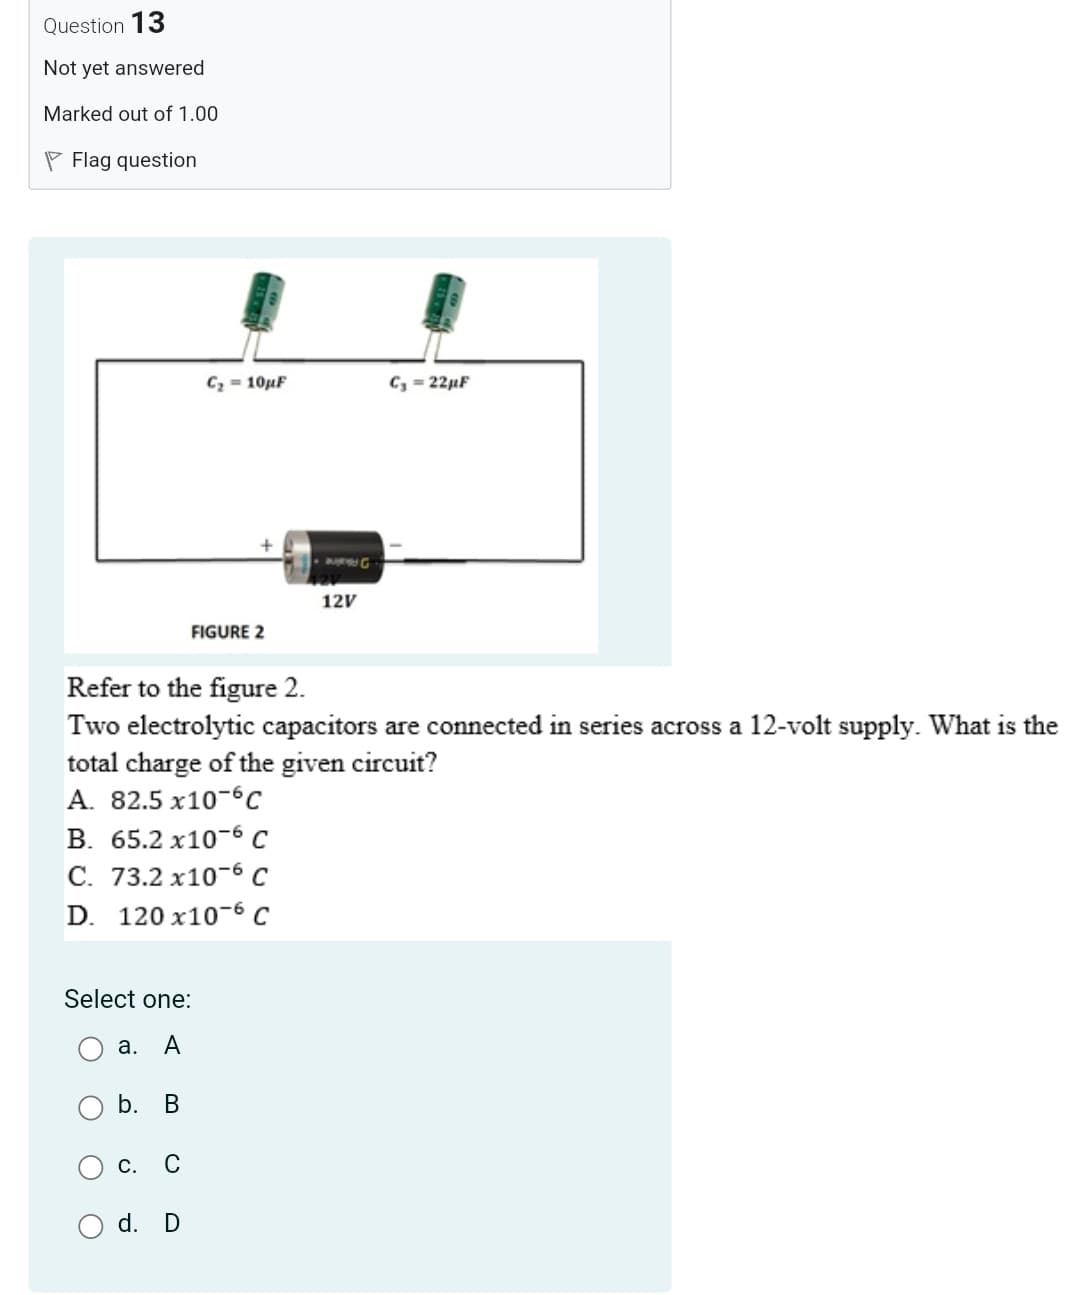 Question 13
Not yet answered
Marked out of 1.00
P Flag question
C2 = 10µF
C, = 22µF
DAaine
12V
FIGURE 2
Refer to the figure 2.
Two electrolytic capacitors are connected in series across a 12-volt supply. What is the
total charge of the given circuit?
A. 82.5 x10-6c
В. 65.2 х10-6 С
С. 73.2 х10-6 С
D. 120 x10-6 C
Select one:
а.
A
b.
В
С.
C
d. D
